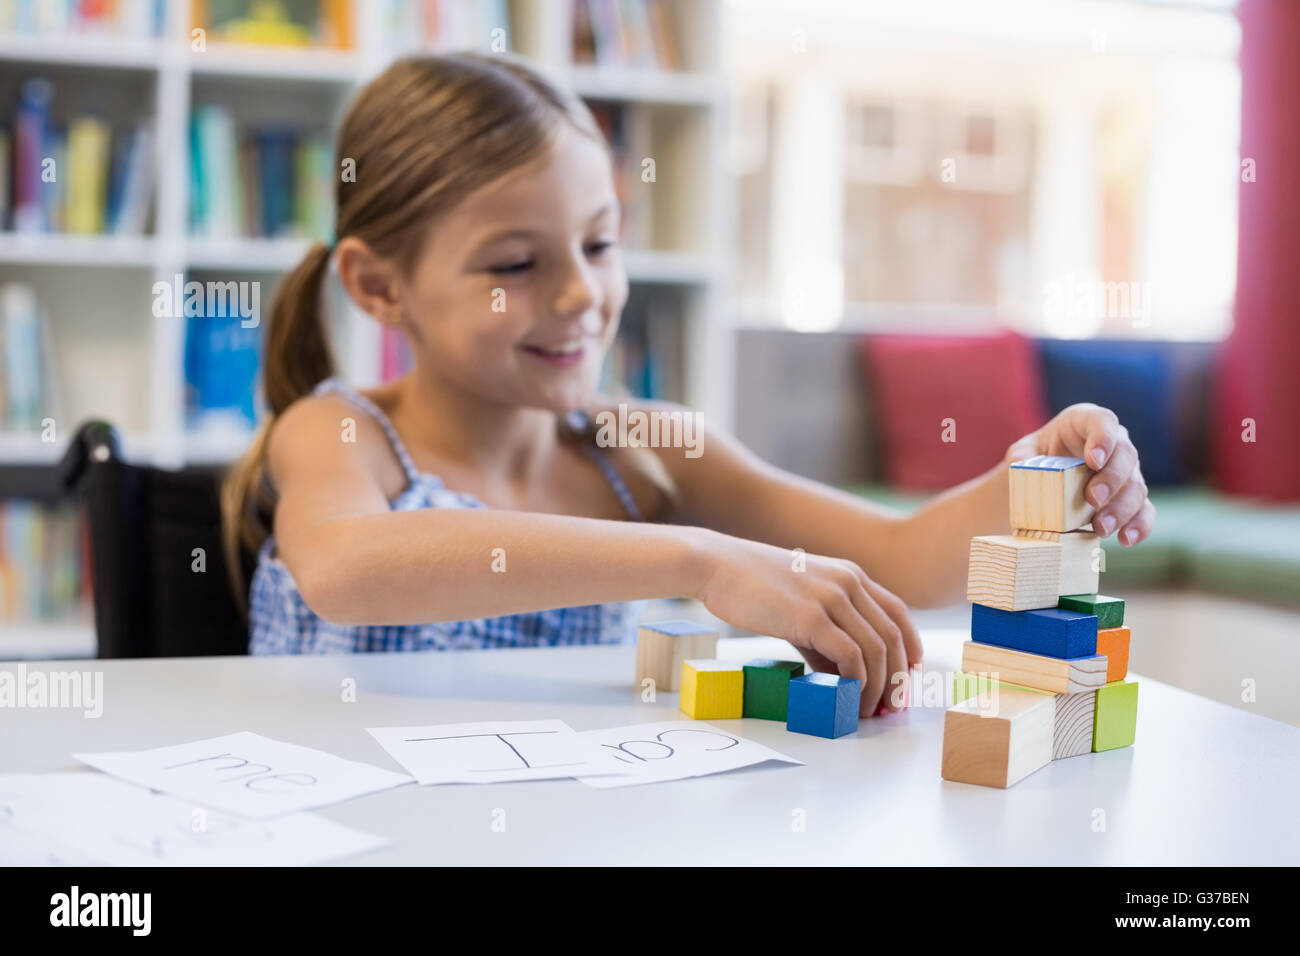 Smiling school girl playing with building block in library Stock Photo